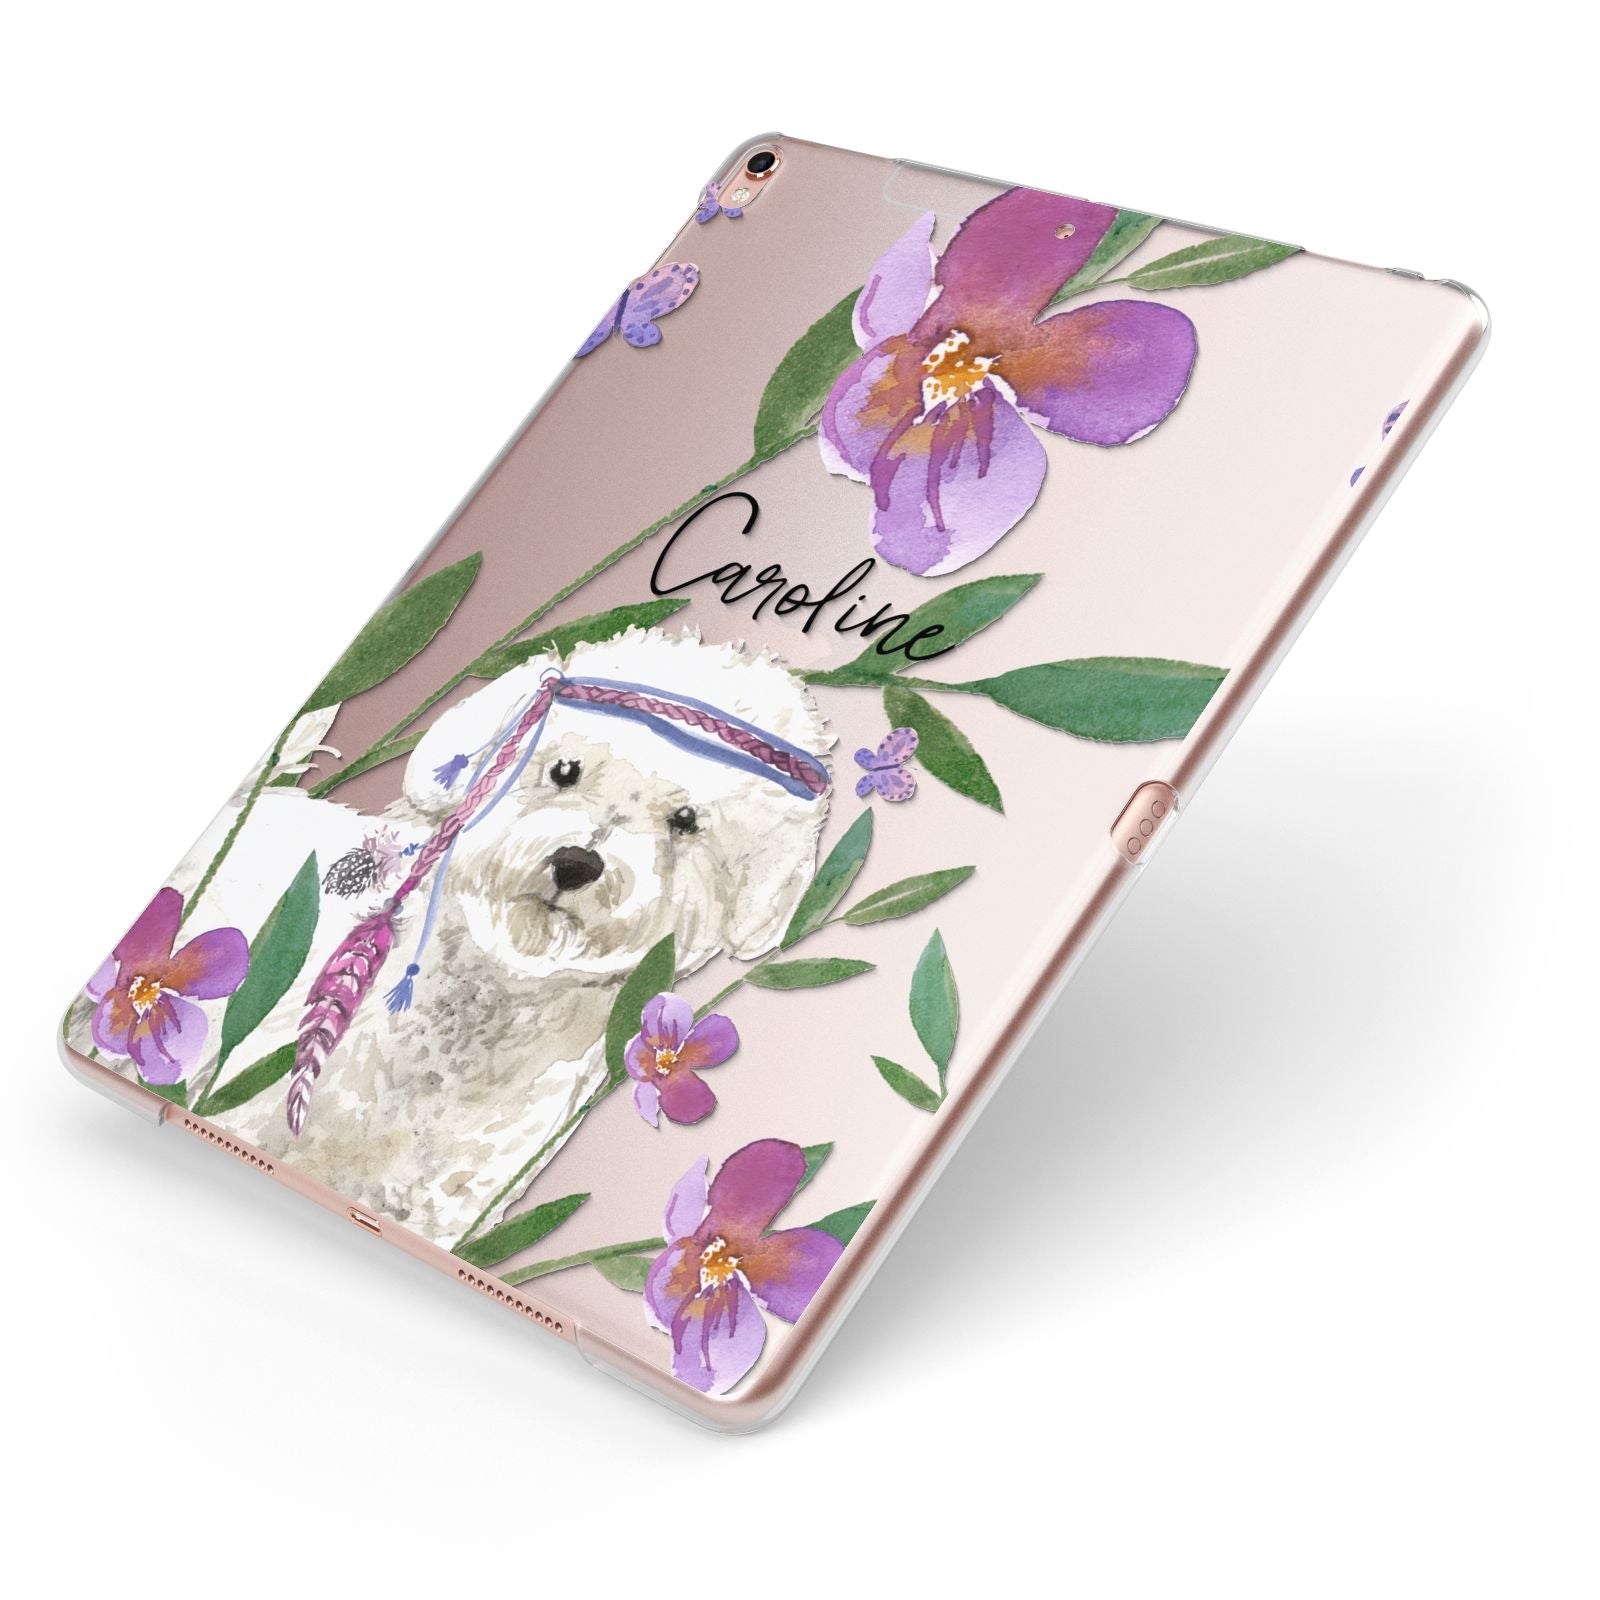 Personalised Bichon Frise Apple iPad Case on Rose Gold iPad Side View